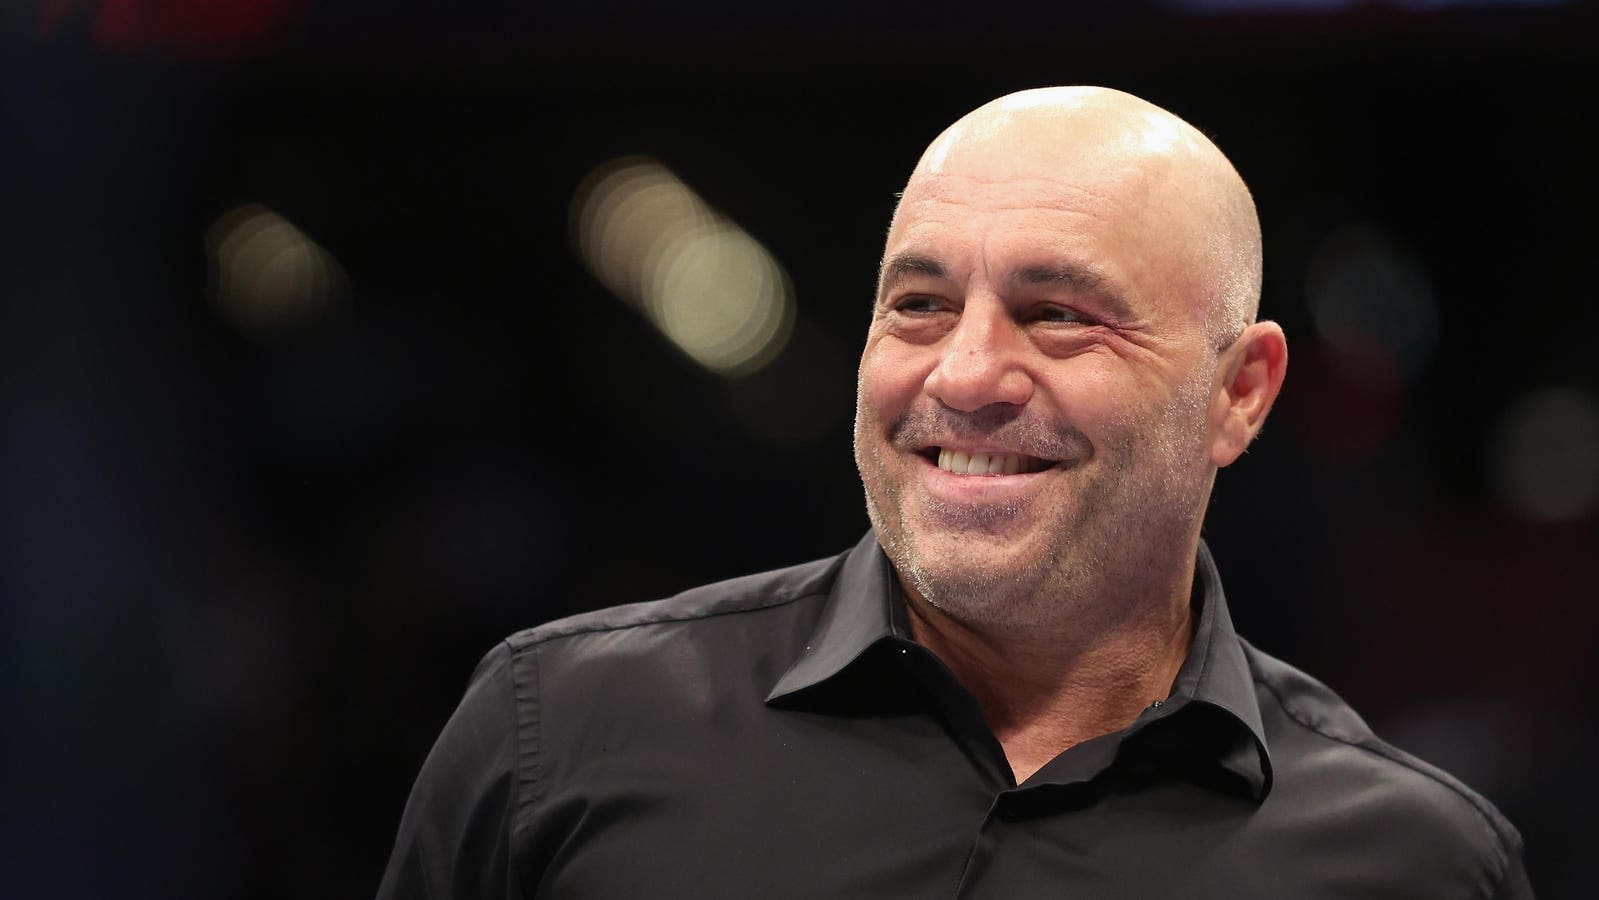 Joe Rogan's First Comedy Special In 6 Years Will Be A Live Netflix Event